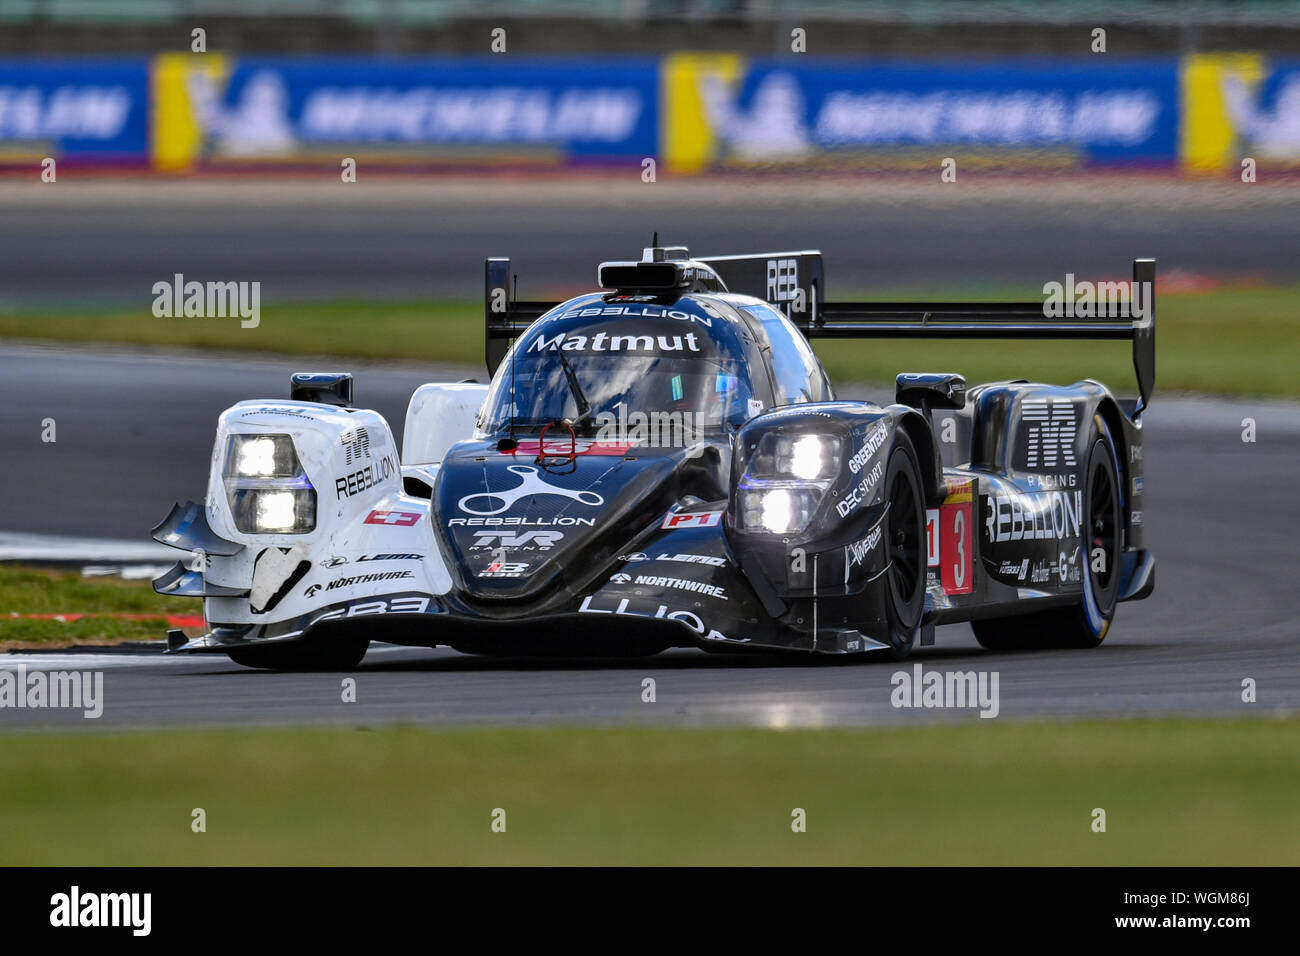 TOWCESTER, UNITED KINGDOM. 01st Sep, 2019. REBELLION RACING (CHE) - Rebellion R13 - Gibson: Nathana?l Berthon (FRA) Pipo Derani (BRA) / Loic Duval (FRA) during SundayÕs Race of the FIA World Endurance Championship with 4 hours Silverstone at Silverstone Circuit on Sunday, September 01, 2019 in TOWCESTER, ENGLAND. Credit: Taka G Wu/Alamy Live News Stock Photo